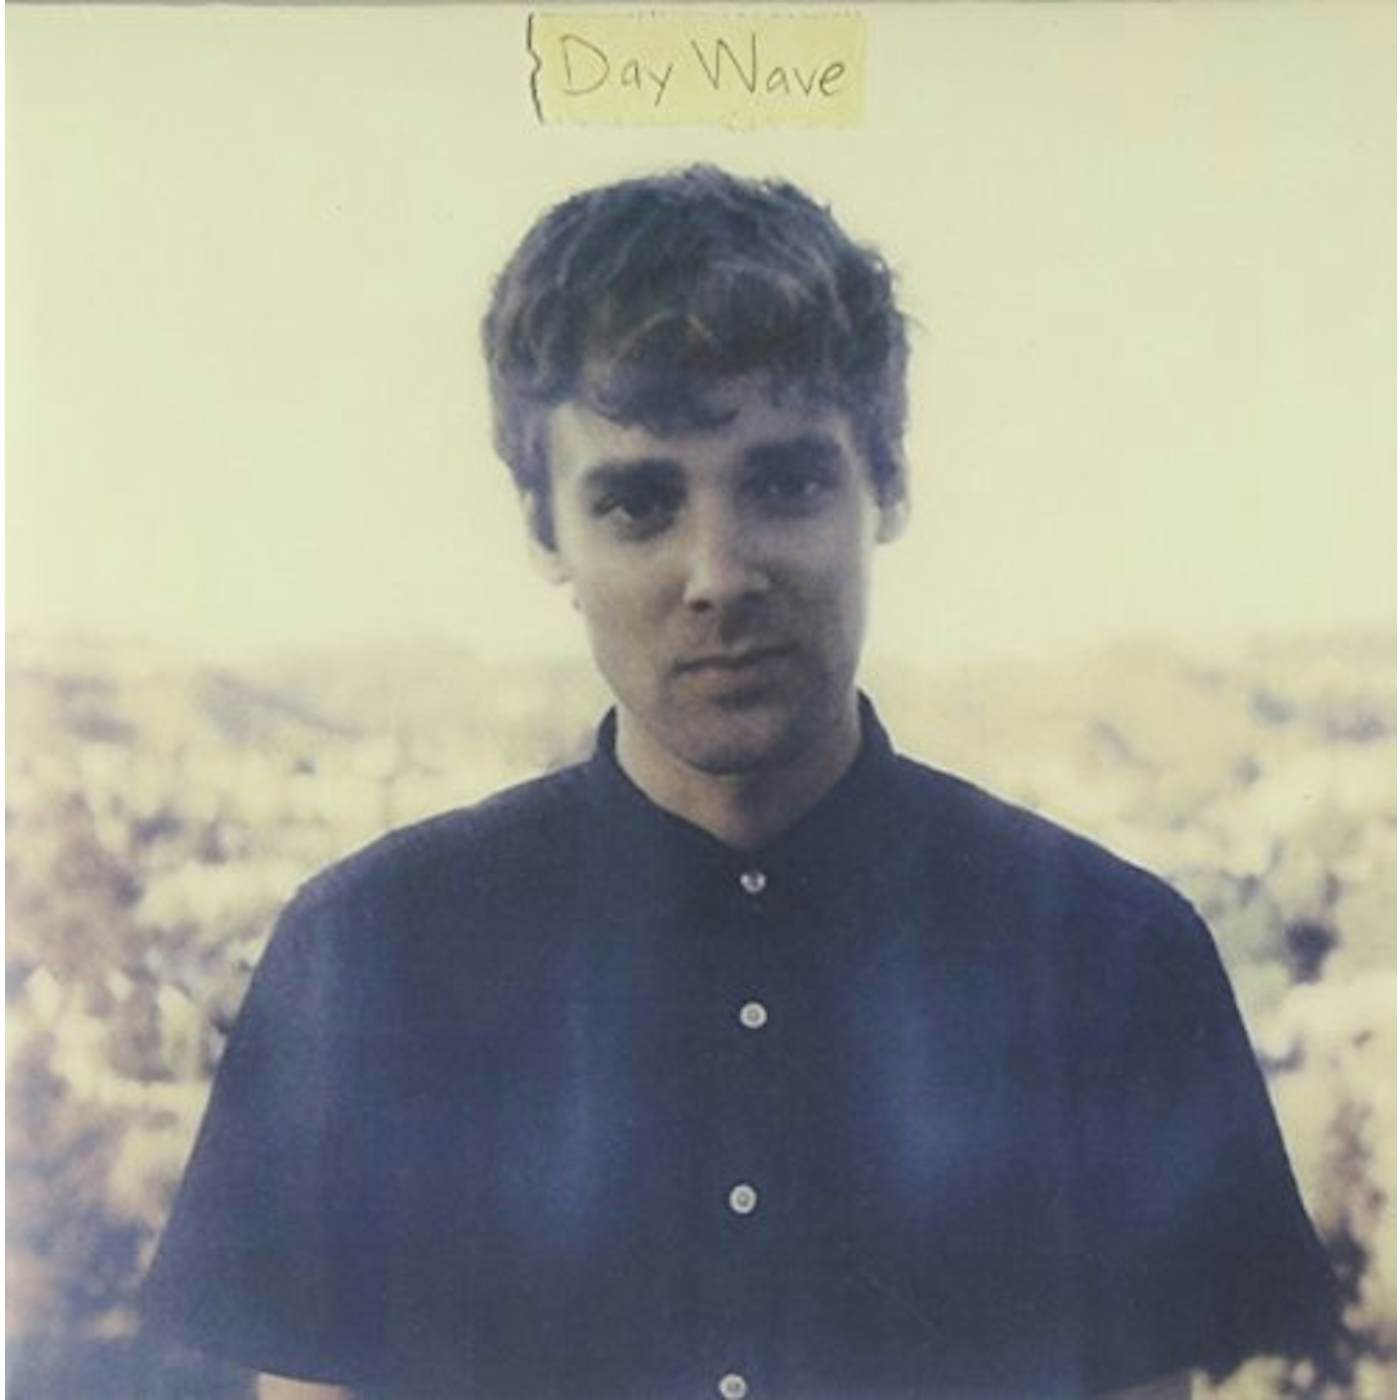 Day Wave COME HOME NOW / YOU ARE WHO YOU ARE Vinyl Record - UK Release